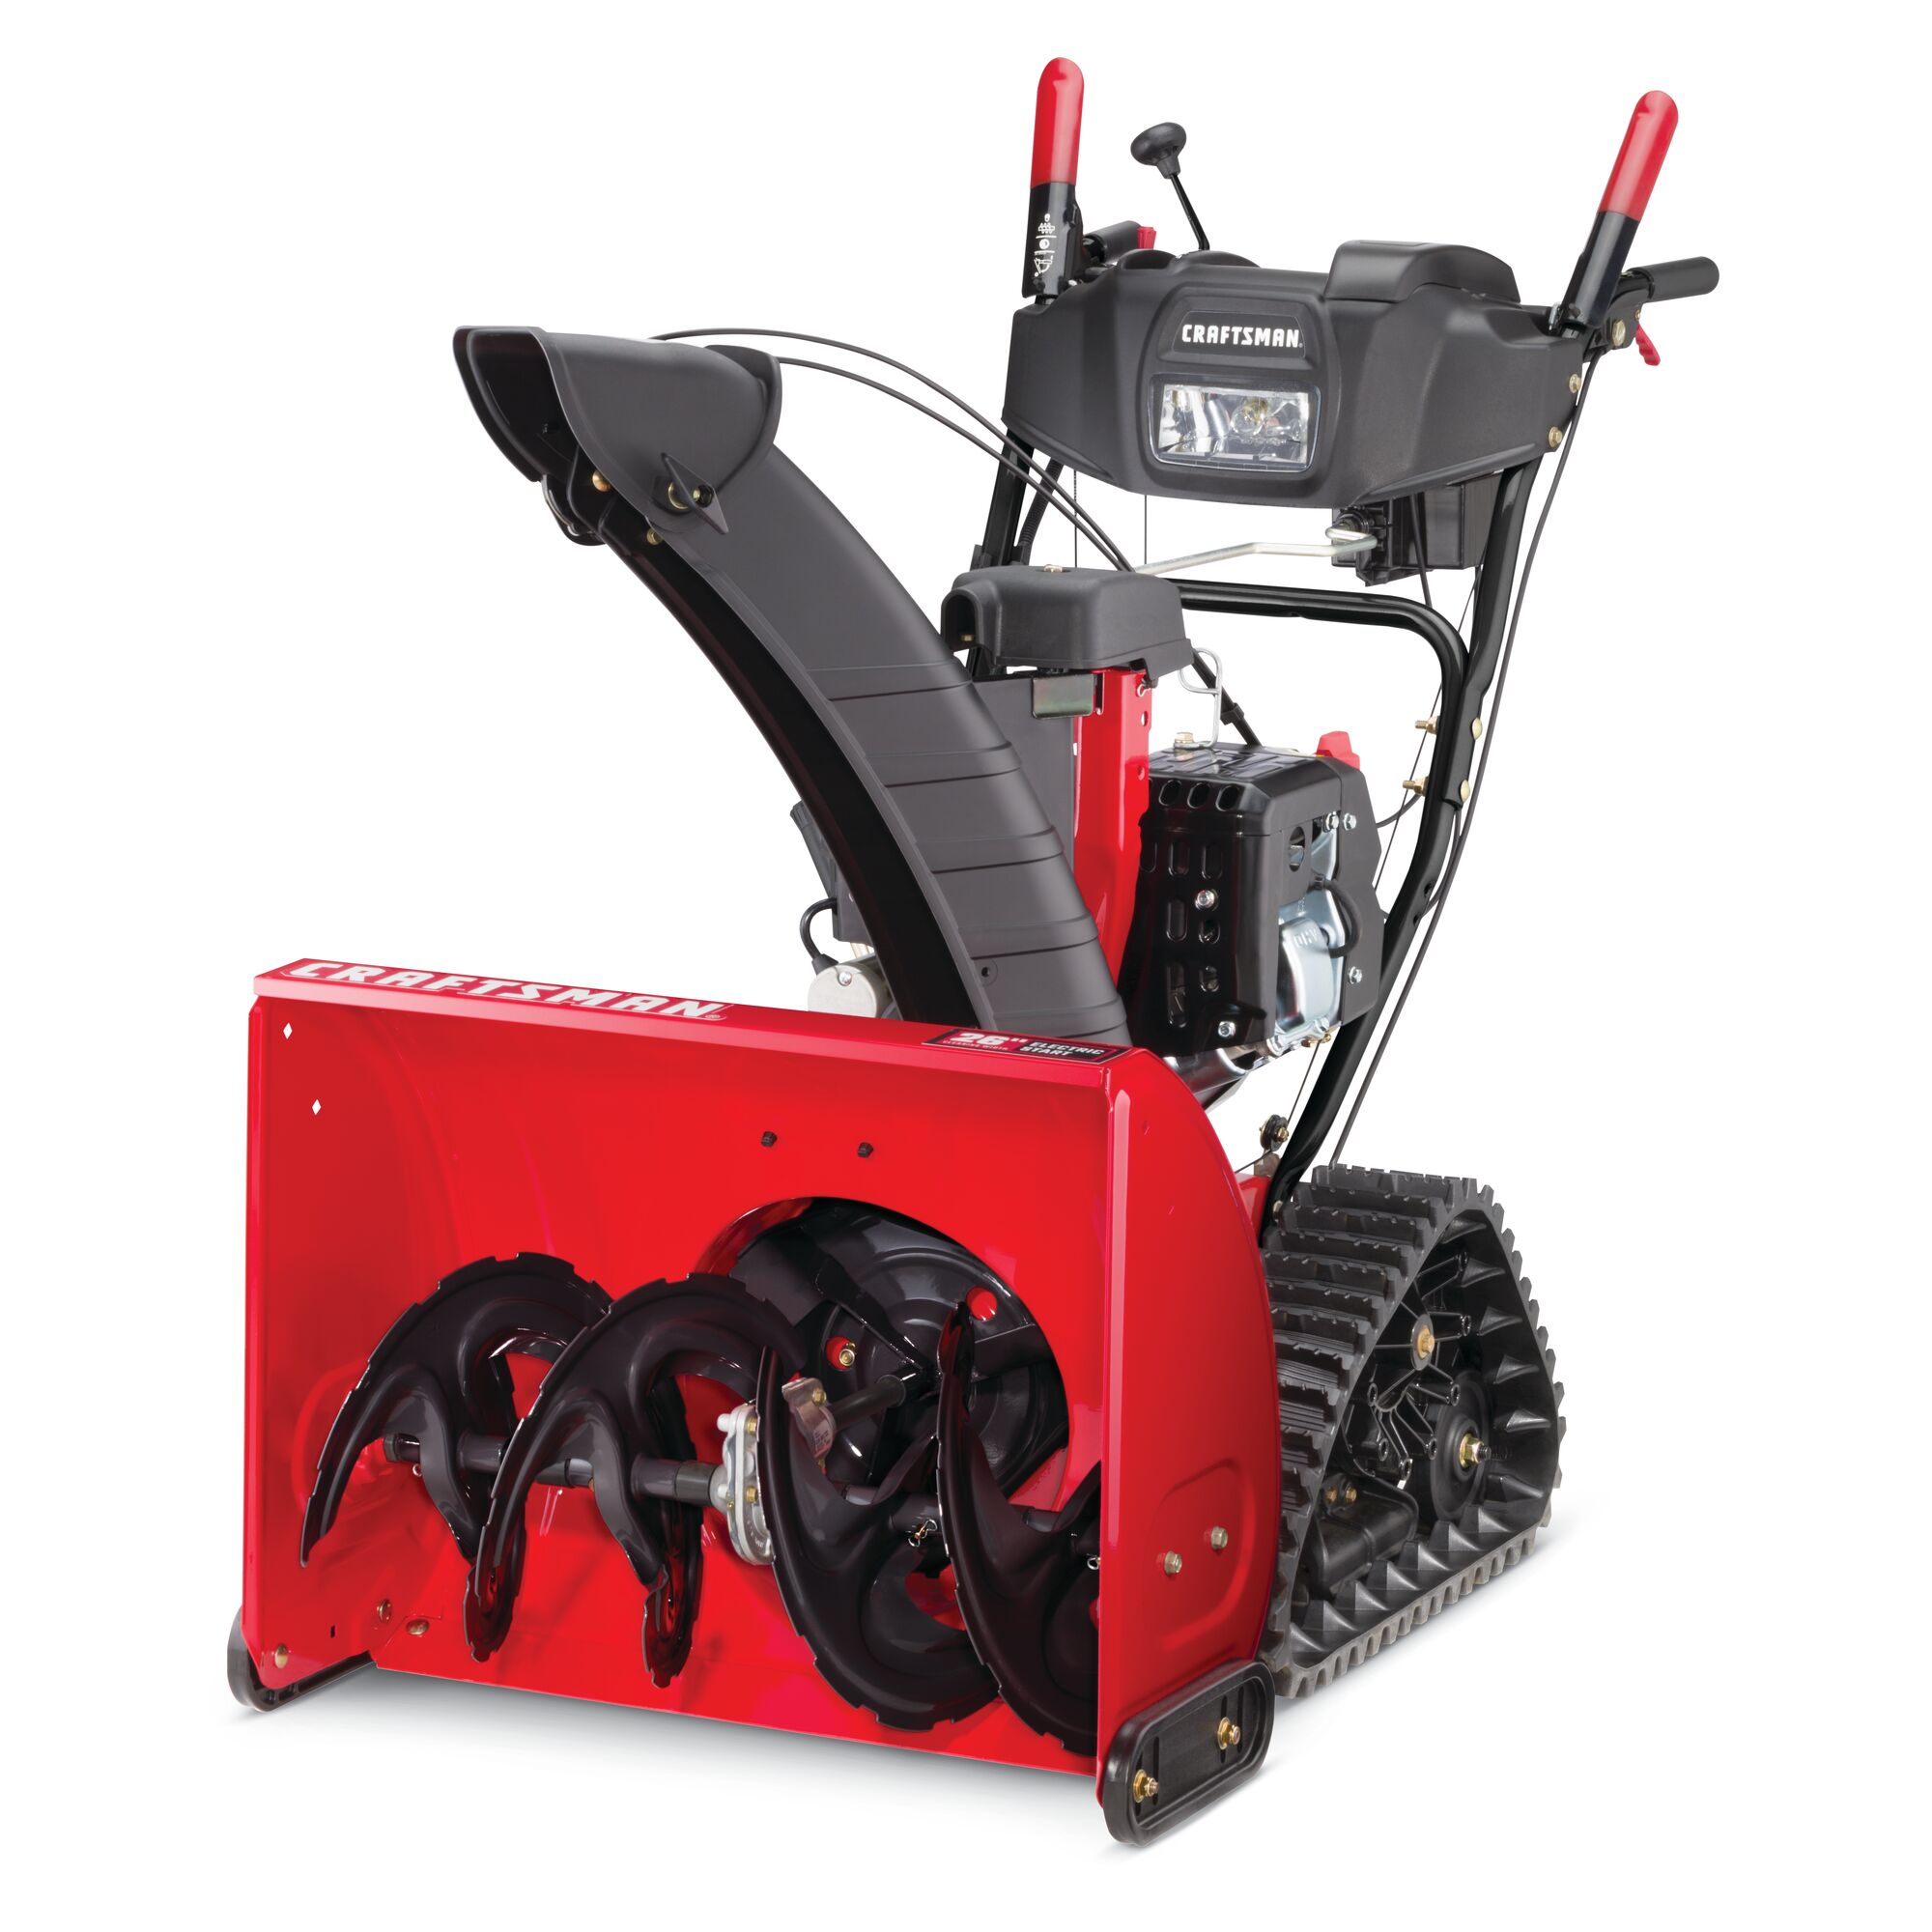 Profile of 26 inch 208 CC electric start track drive snow blower.